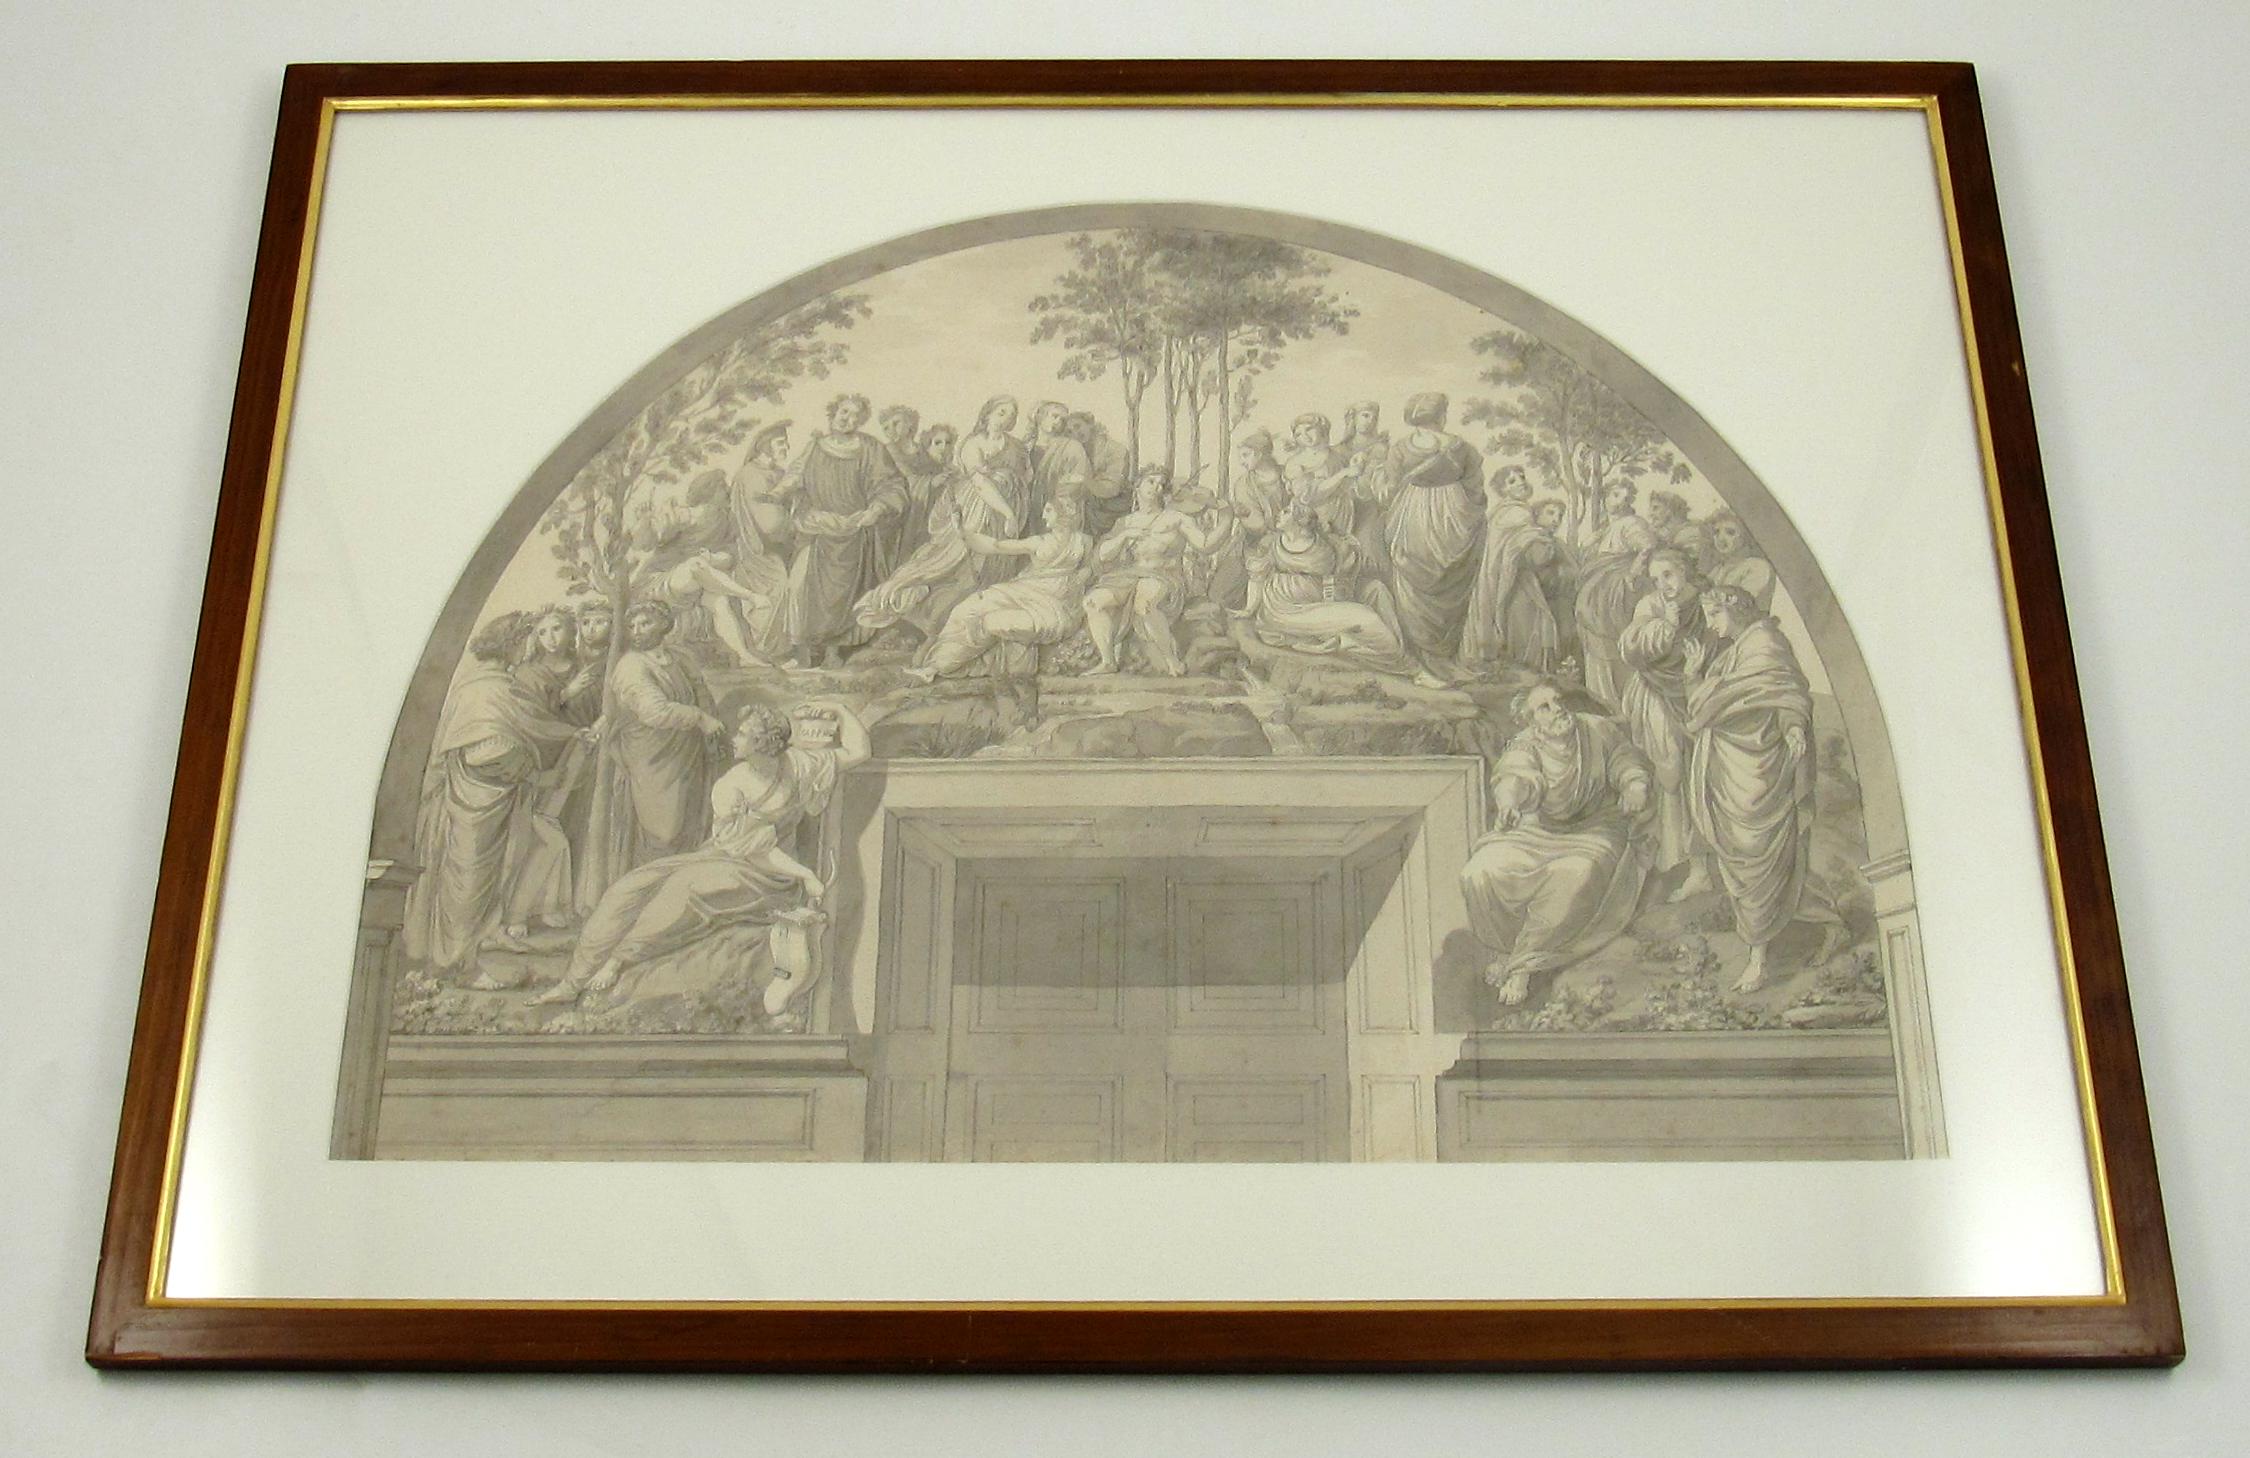 in which painting did raphael use a trompe l’oeil arch